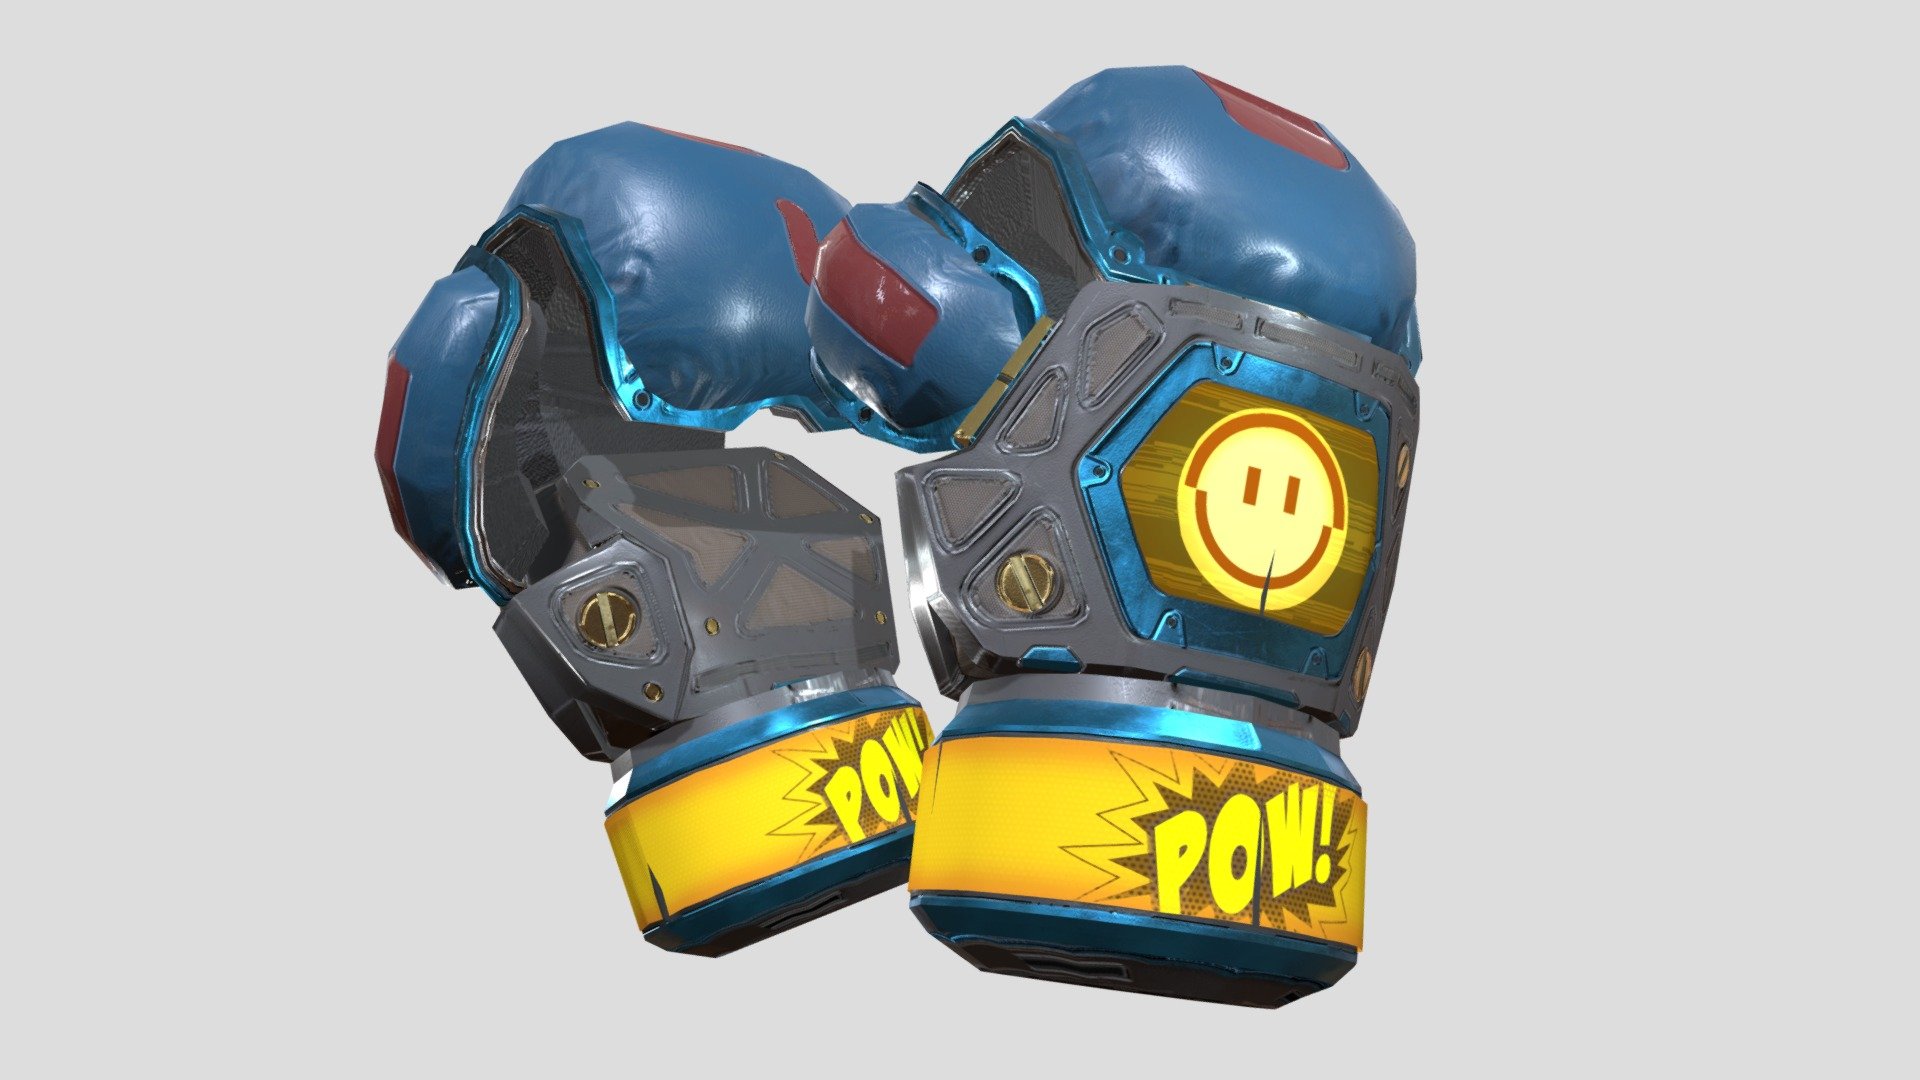 ➢Pathfinder SuperLegendary: Boxing Gloves 3Dmodel

JP:こちらからログイン不要で3Dモデルが購入できます

EN:You can purchase 3Dmodels from here without login

➠https://shingfx.official.ec/

NFT➢https://opensea.io/ShinGFX

Please subscribe⤵ 

YouTube➢https://www.youtube.com/channel/UCNZDsdSXai2E8bvhUmWg1NQ/videos?view_as=subscriber

Twitter➢https://twitter.com/Shin_GFX - 【ApexLegends】[Blender] ➢Pathfinder_gloves - 3D model by Shin_GFX 3d model